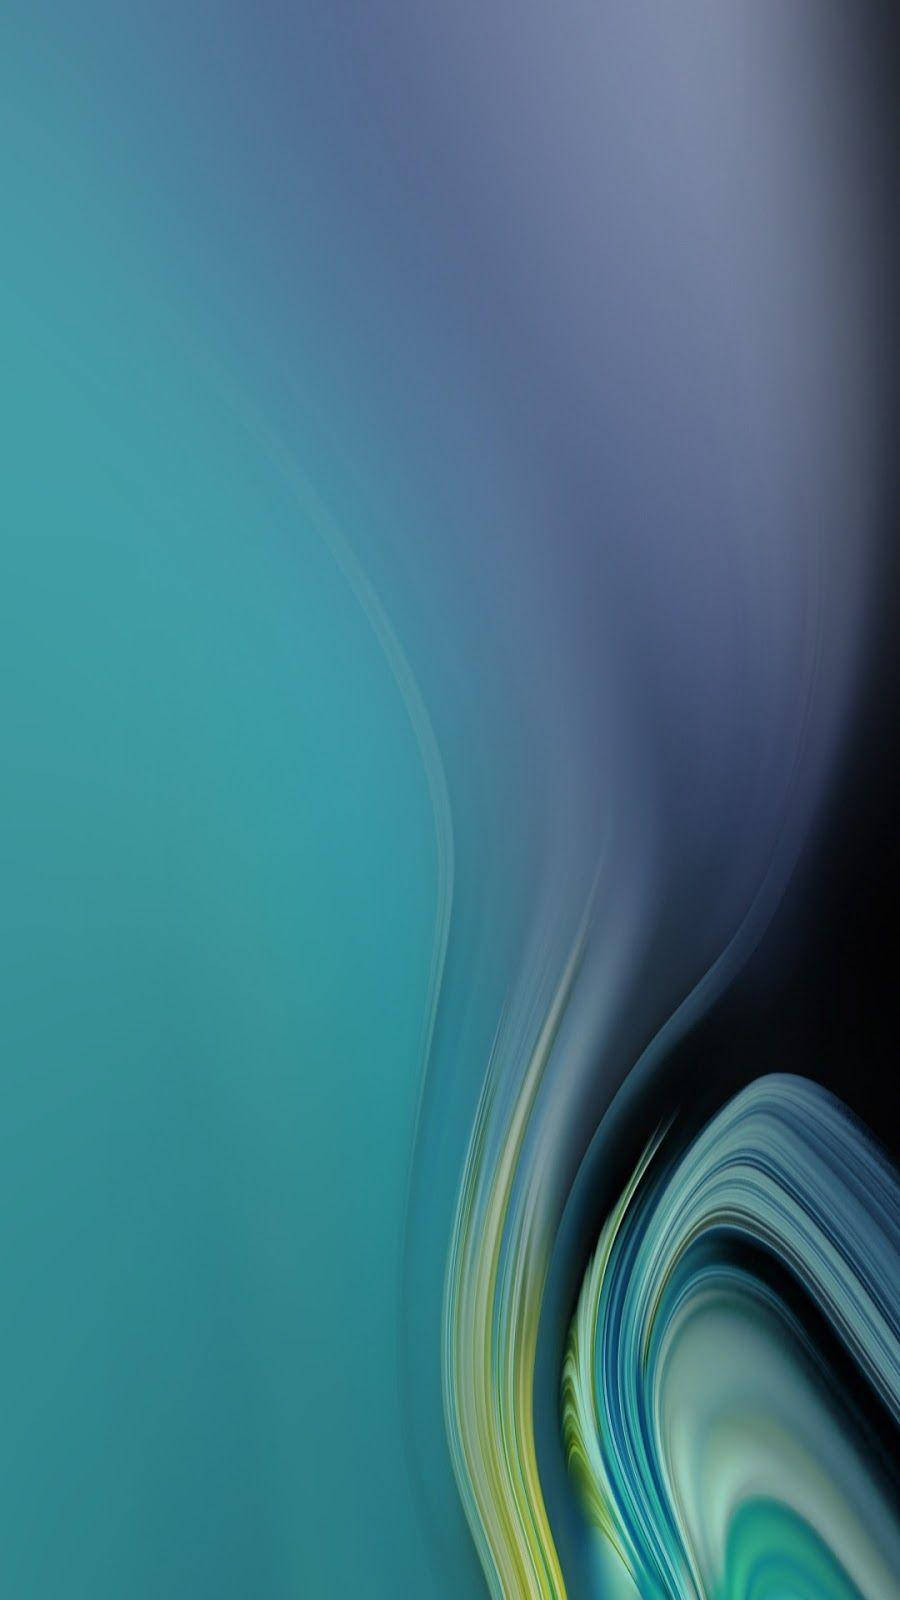 Sleek And Powerful - The Redmi 9 Smartphone Background